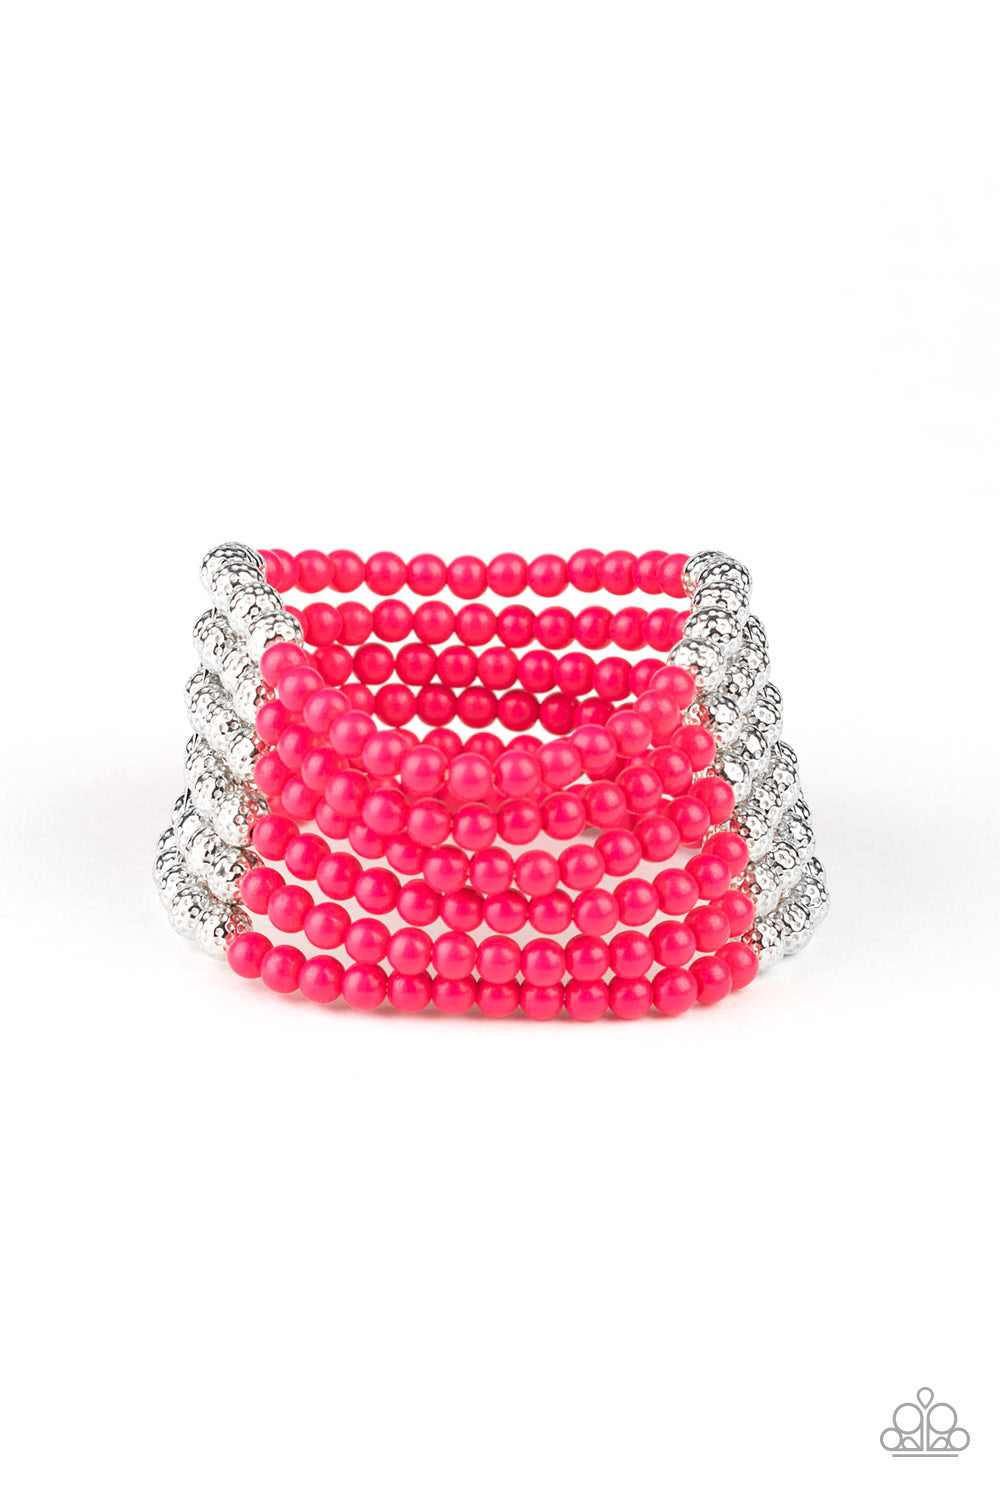 LAYER It On Thick - Pink bracelet